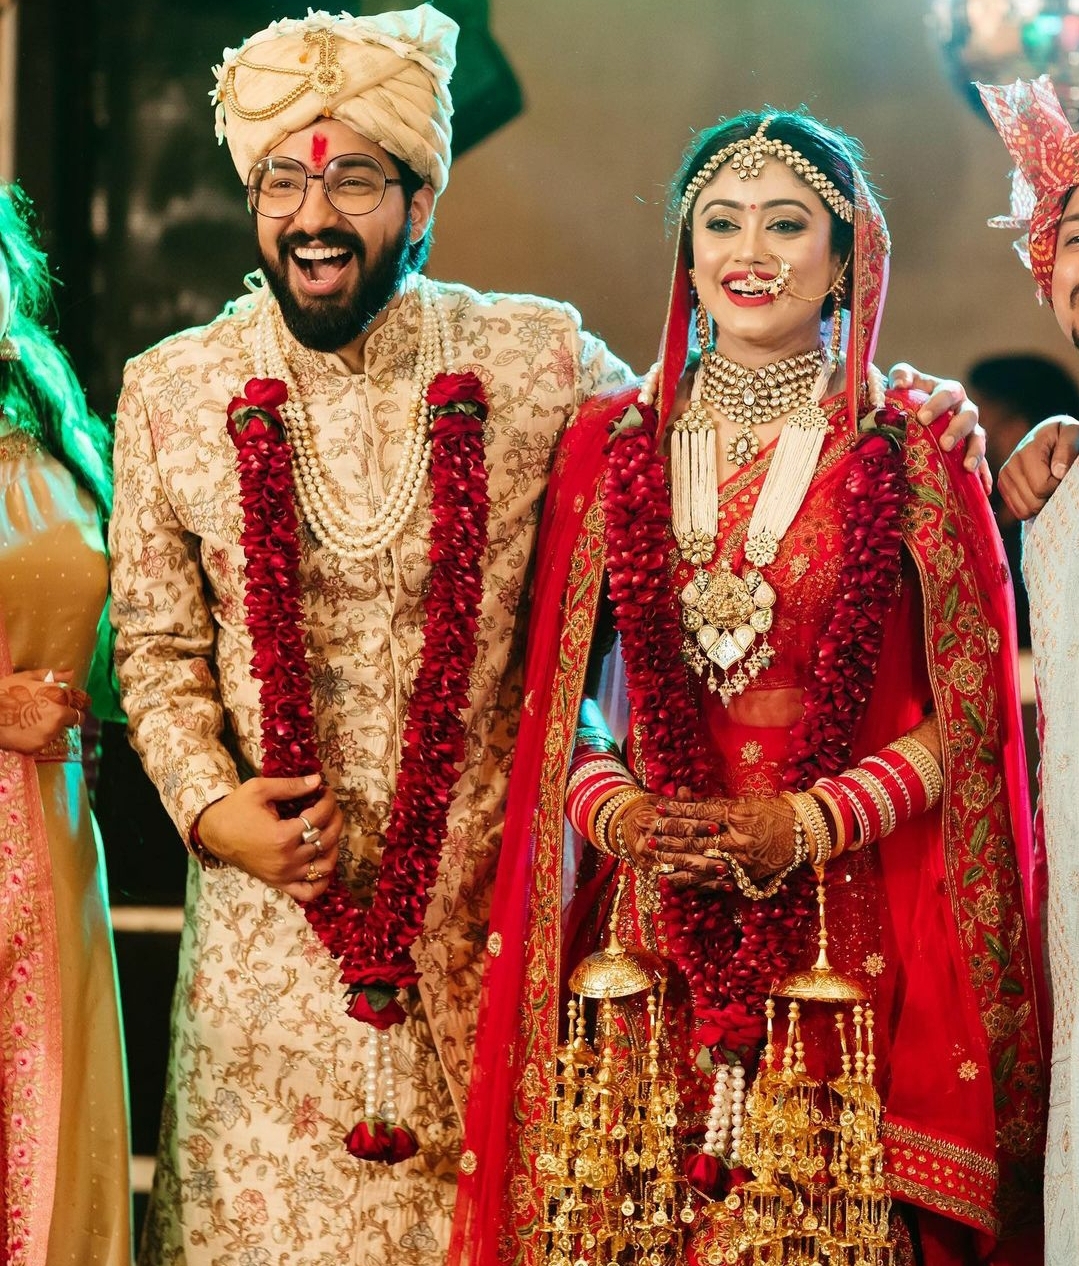 Download In Pics: Sachet Tandon-Parampara Thakur Tie the Knot in a Regal Celebration - Photogallery